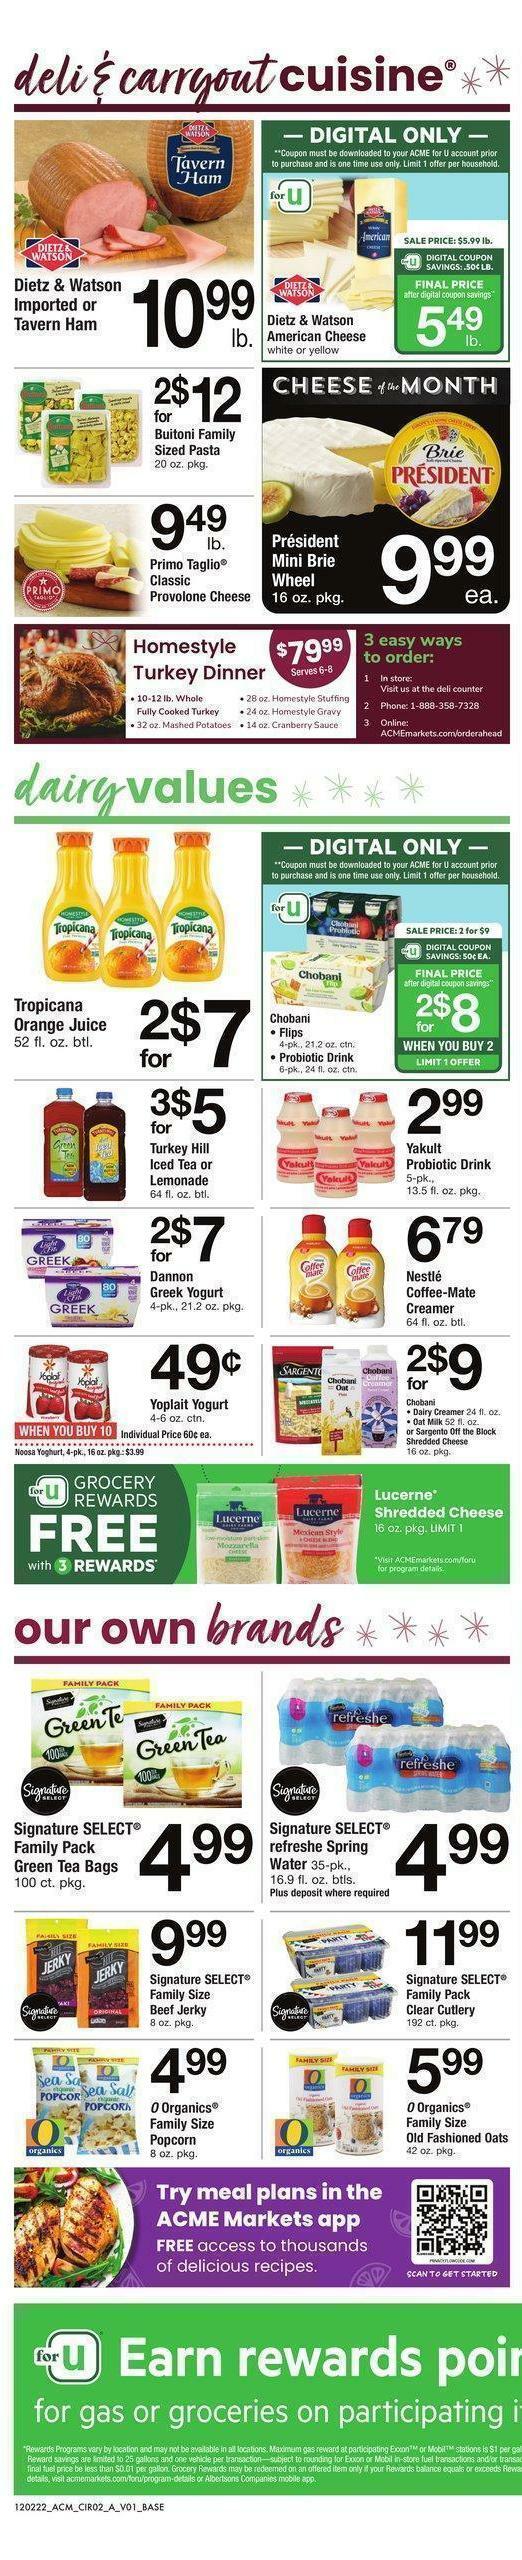 ACME Markets Weekly Ad from December 2